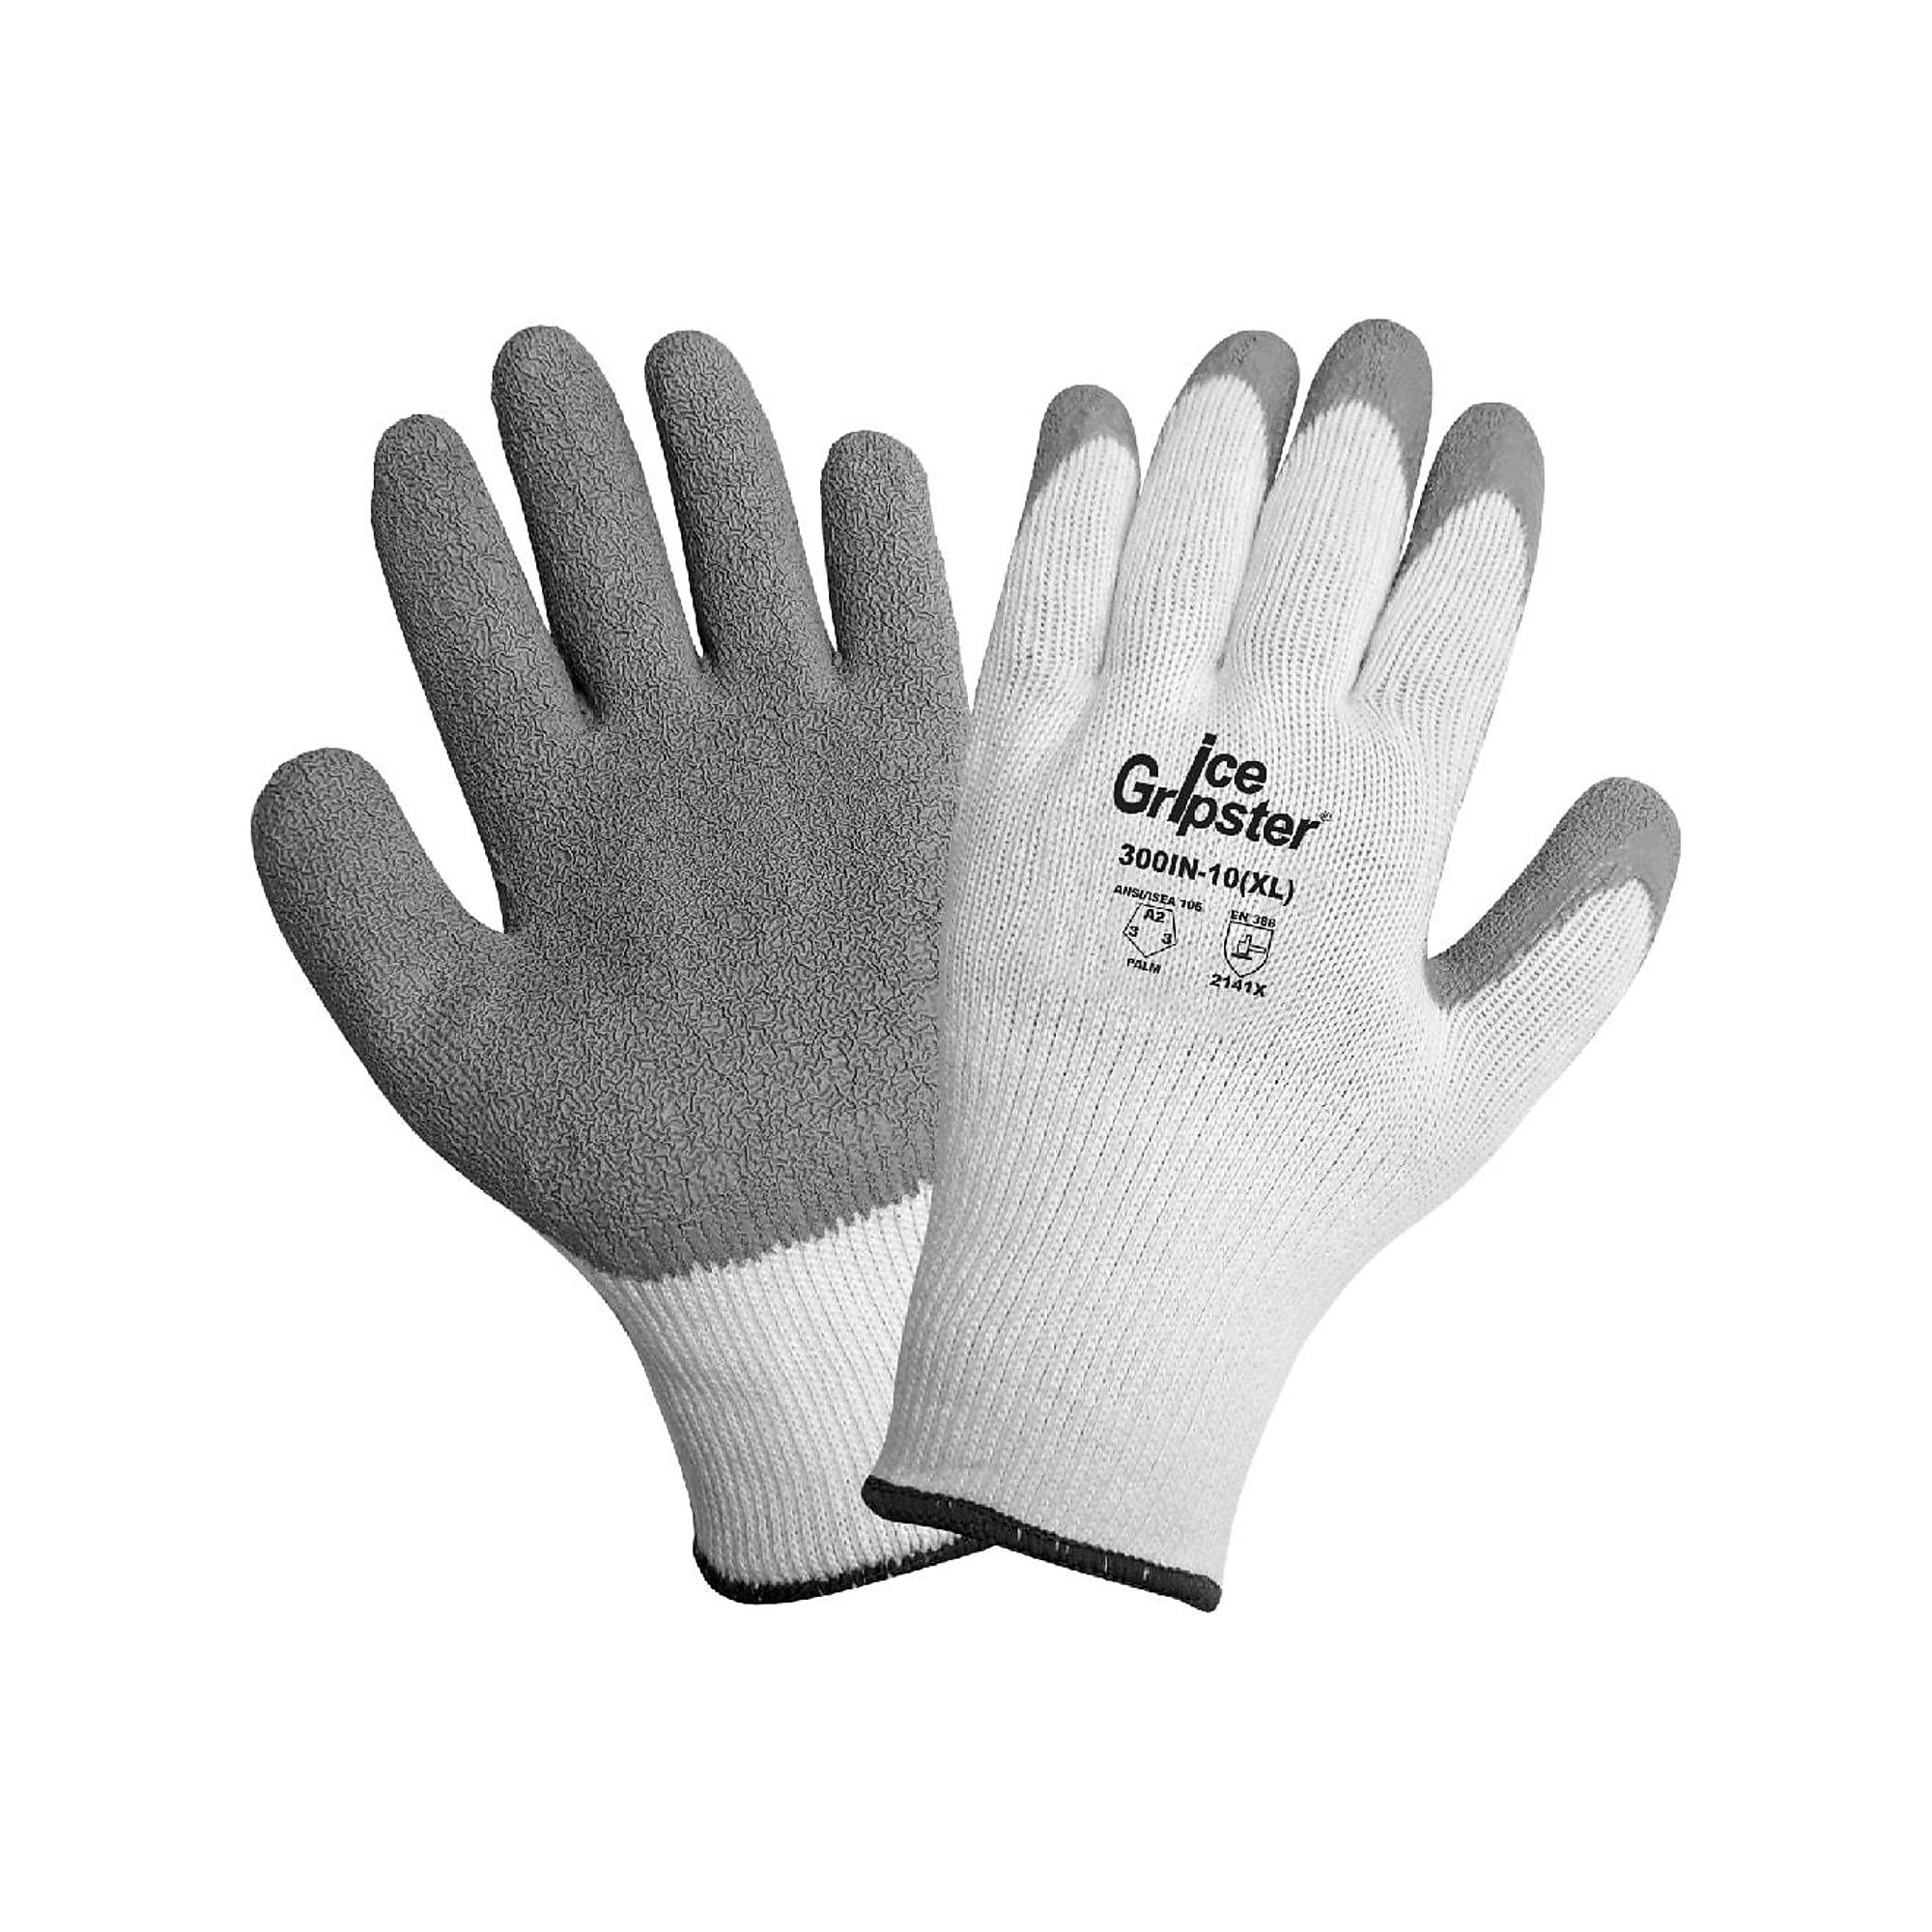 Global Glove Ice Gripster , White, Insulated, Rubber Dip, Cut Resist A2 Gloves- 12 Pairs, Size M, Color White/Gray, Included (qty.) 12 Model 300IN-8(M